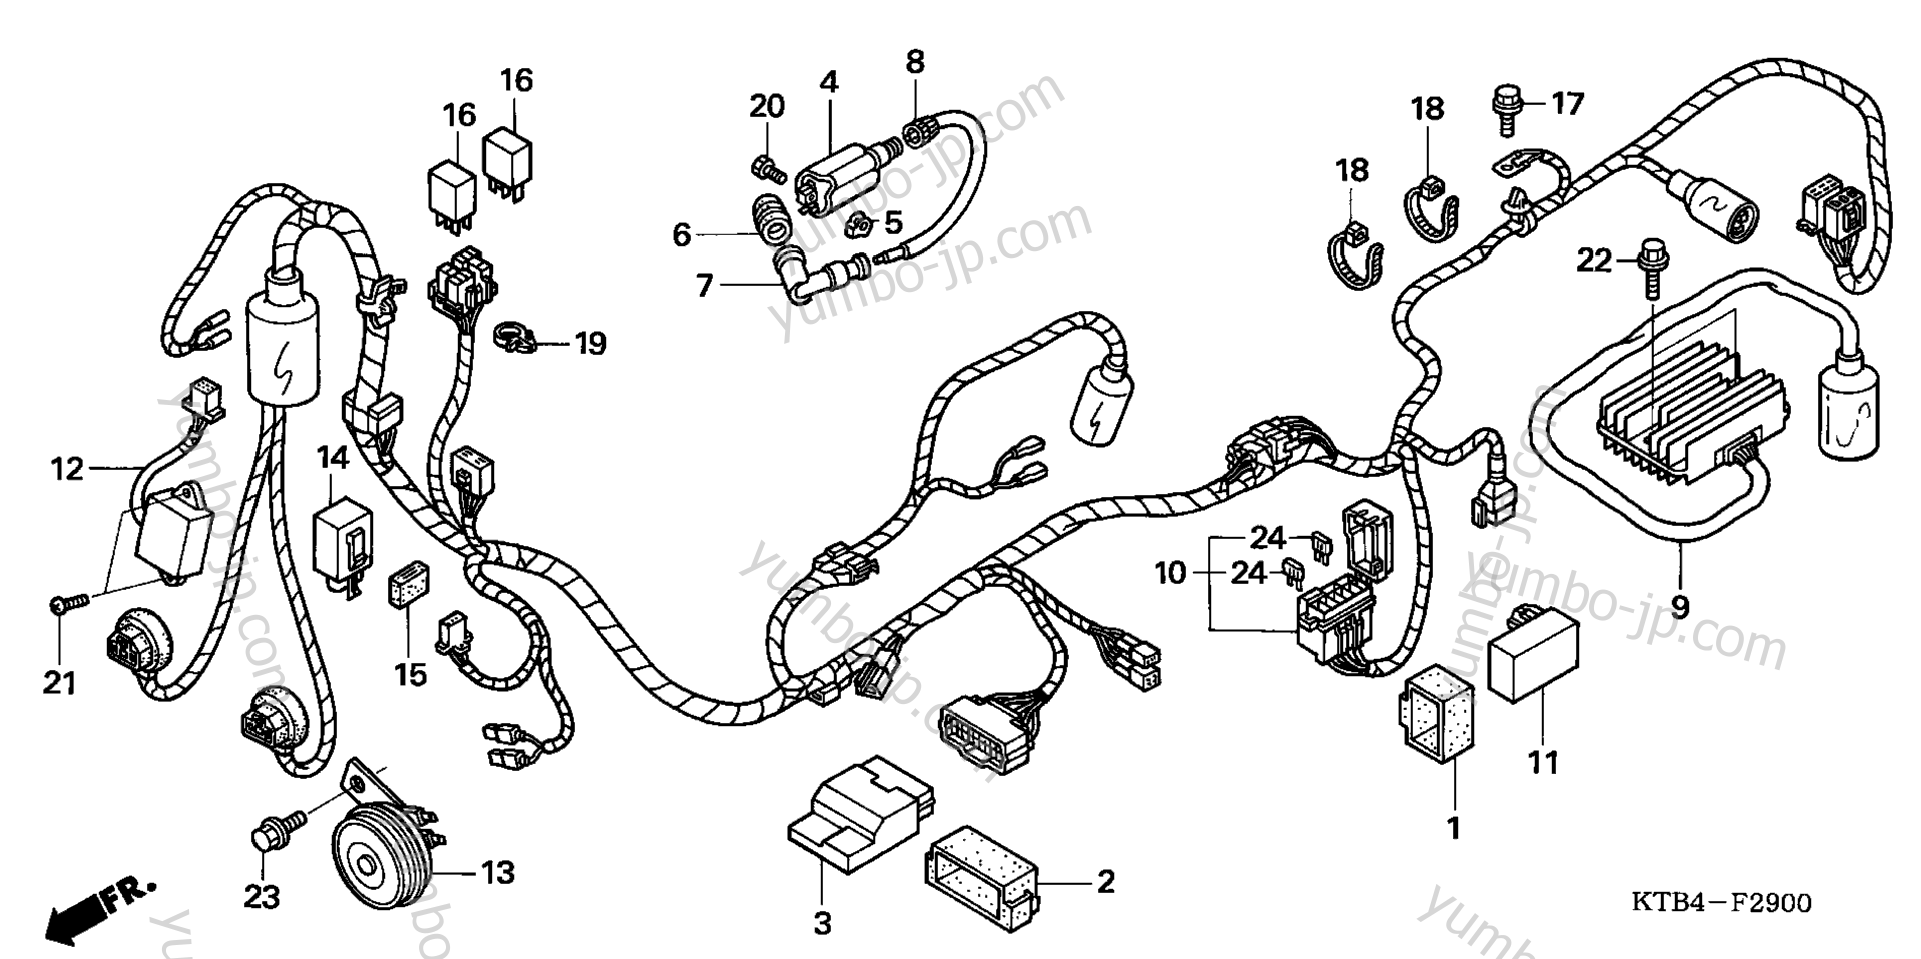 YUMBO spare parts catalog for скутера HONDA PS250 AC 2005 year WIRE  HARNESS